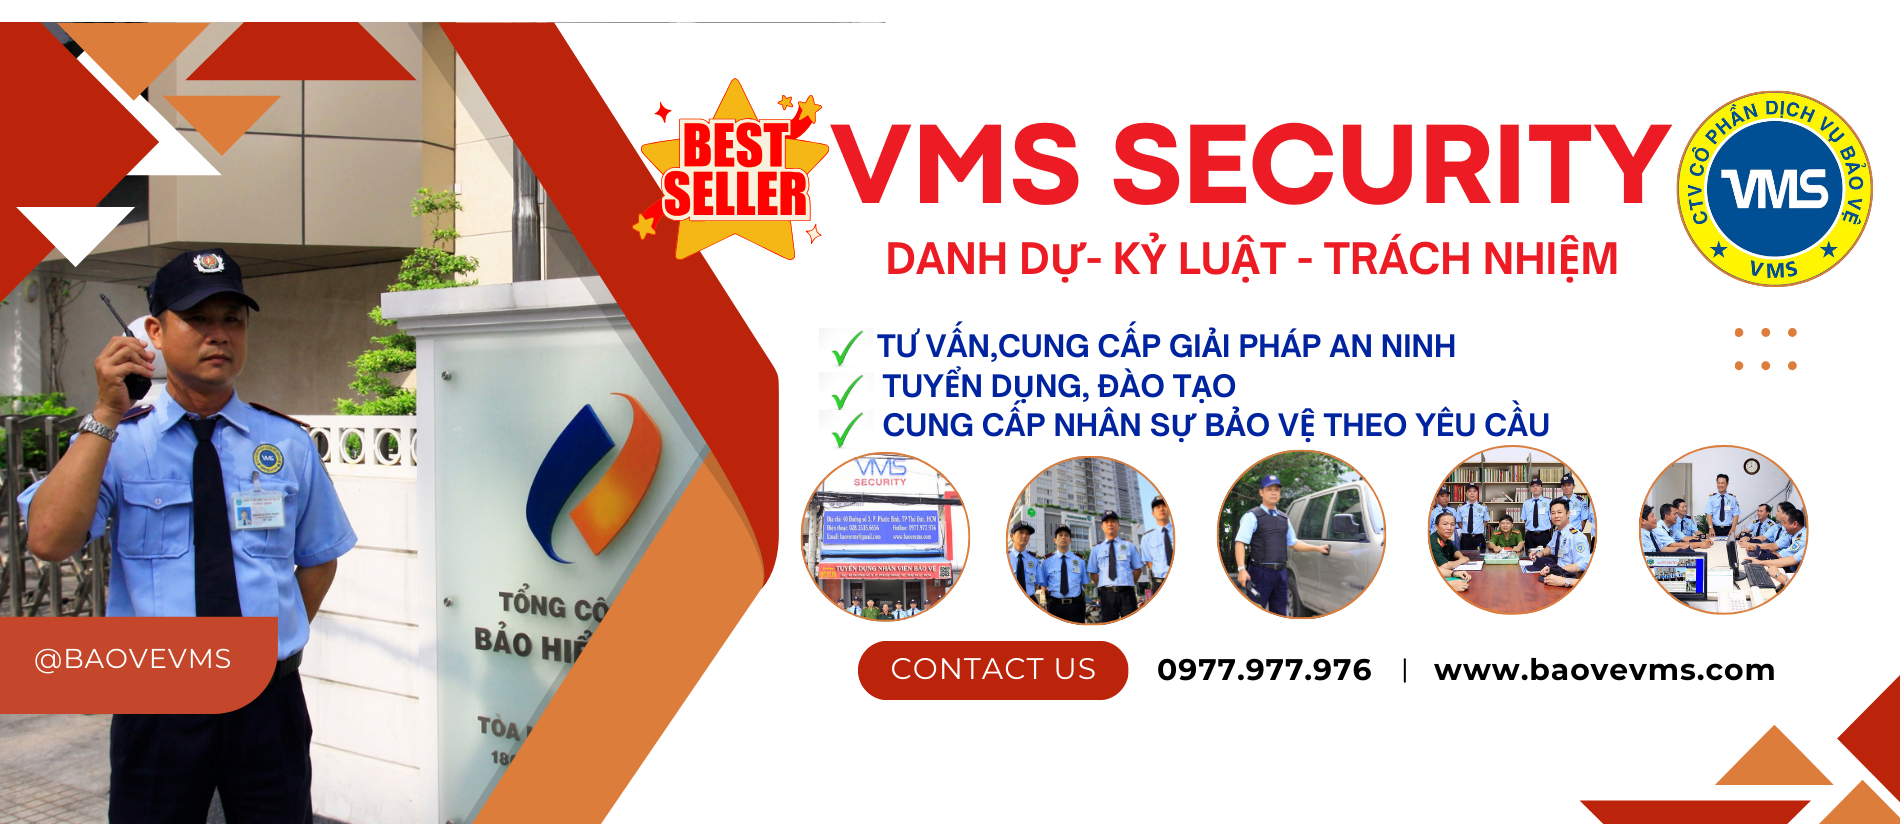 vms security (1900 x 824 px)2_-29-05-2024-13-05-54.png